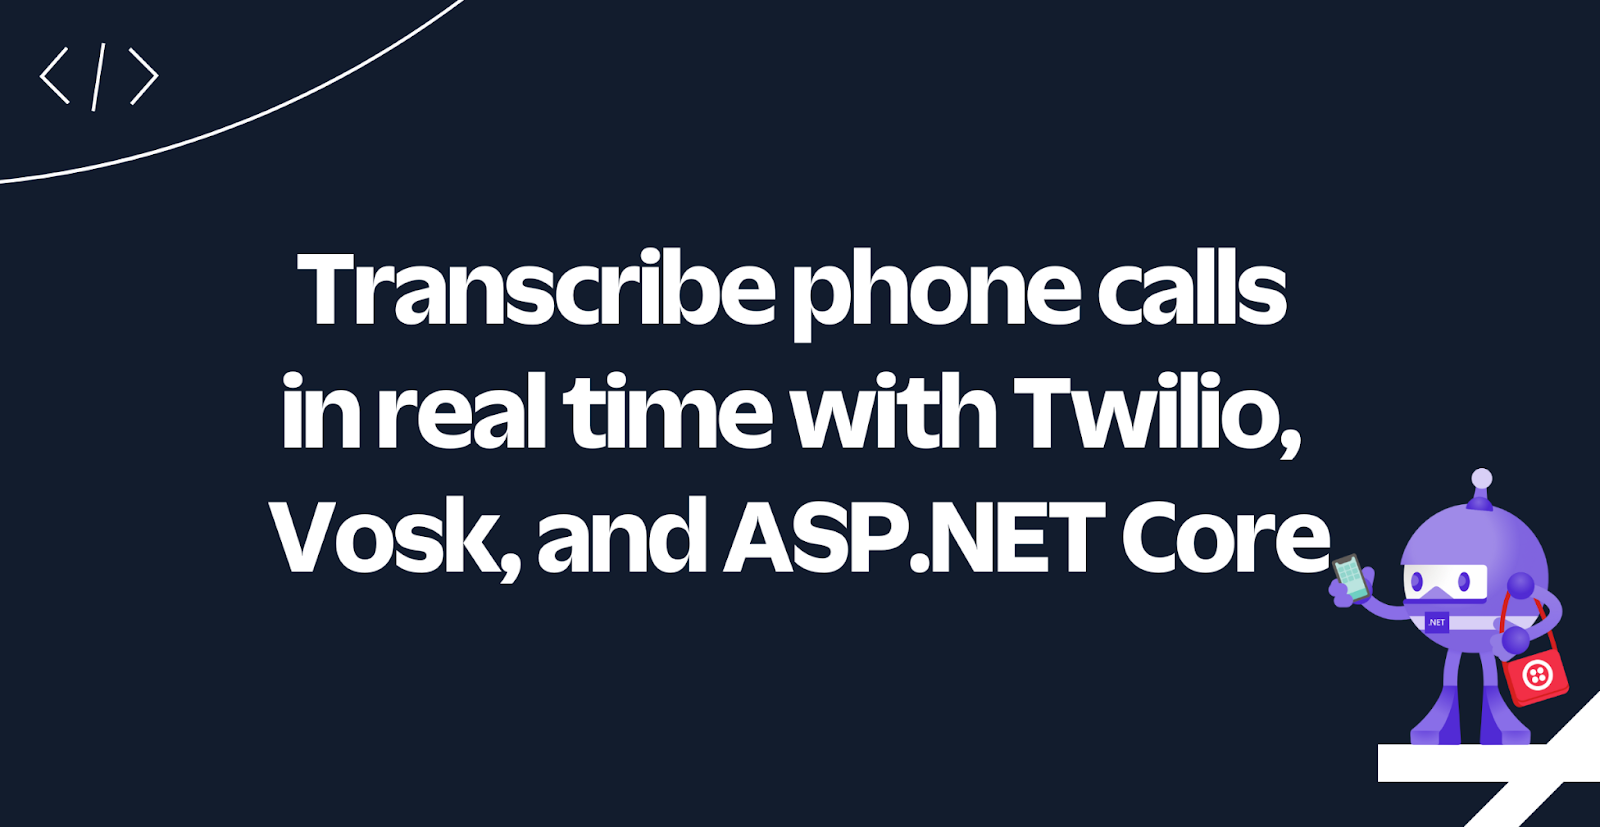 Transcribe phone calls in real time with Twilio, Vosk, and ASP.NET Core